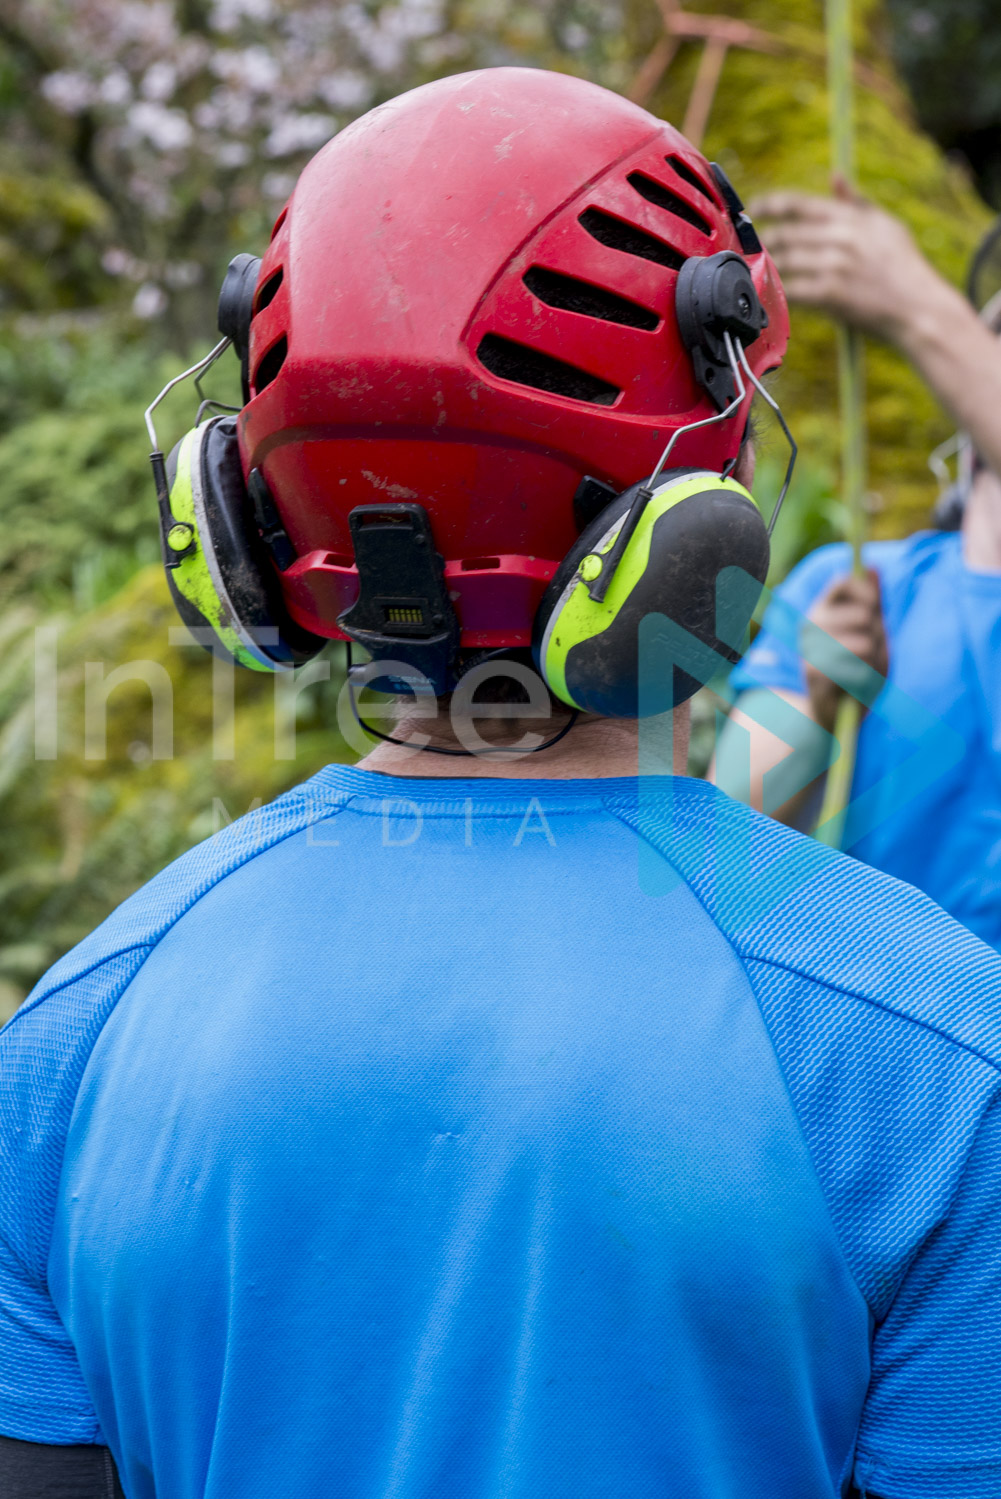 Back of a red helmet with ear protection InTree arborist image 001-21-5855